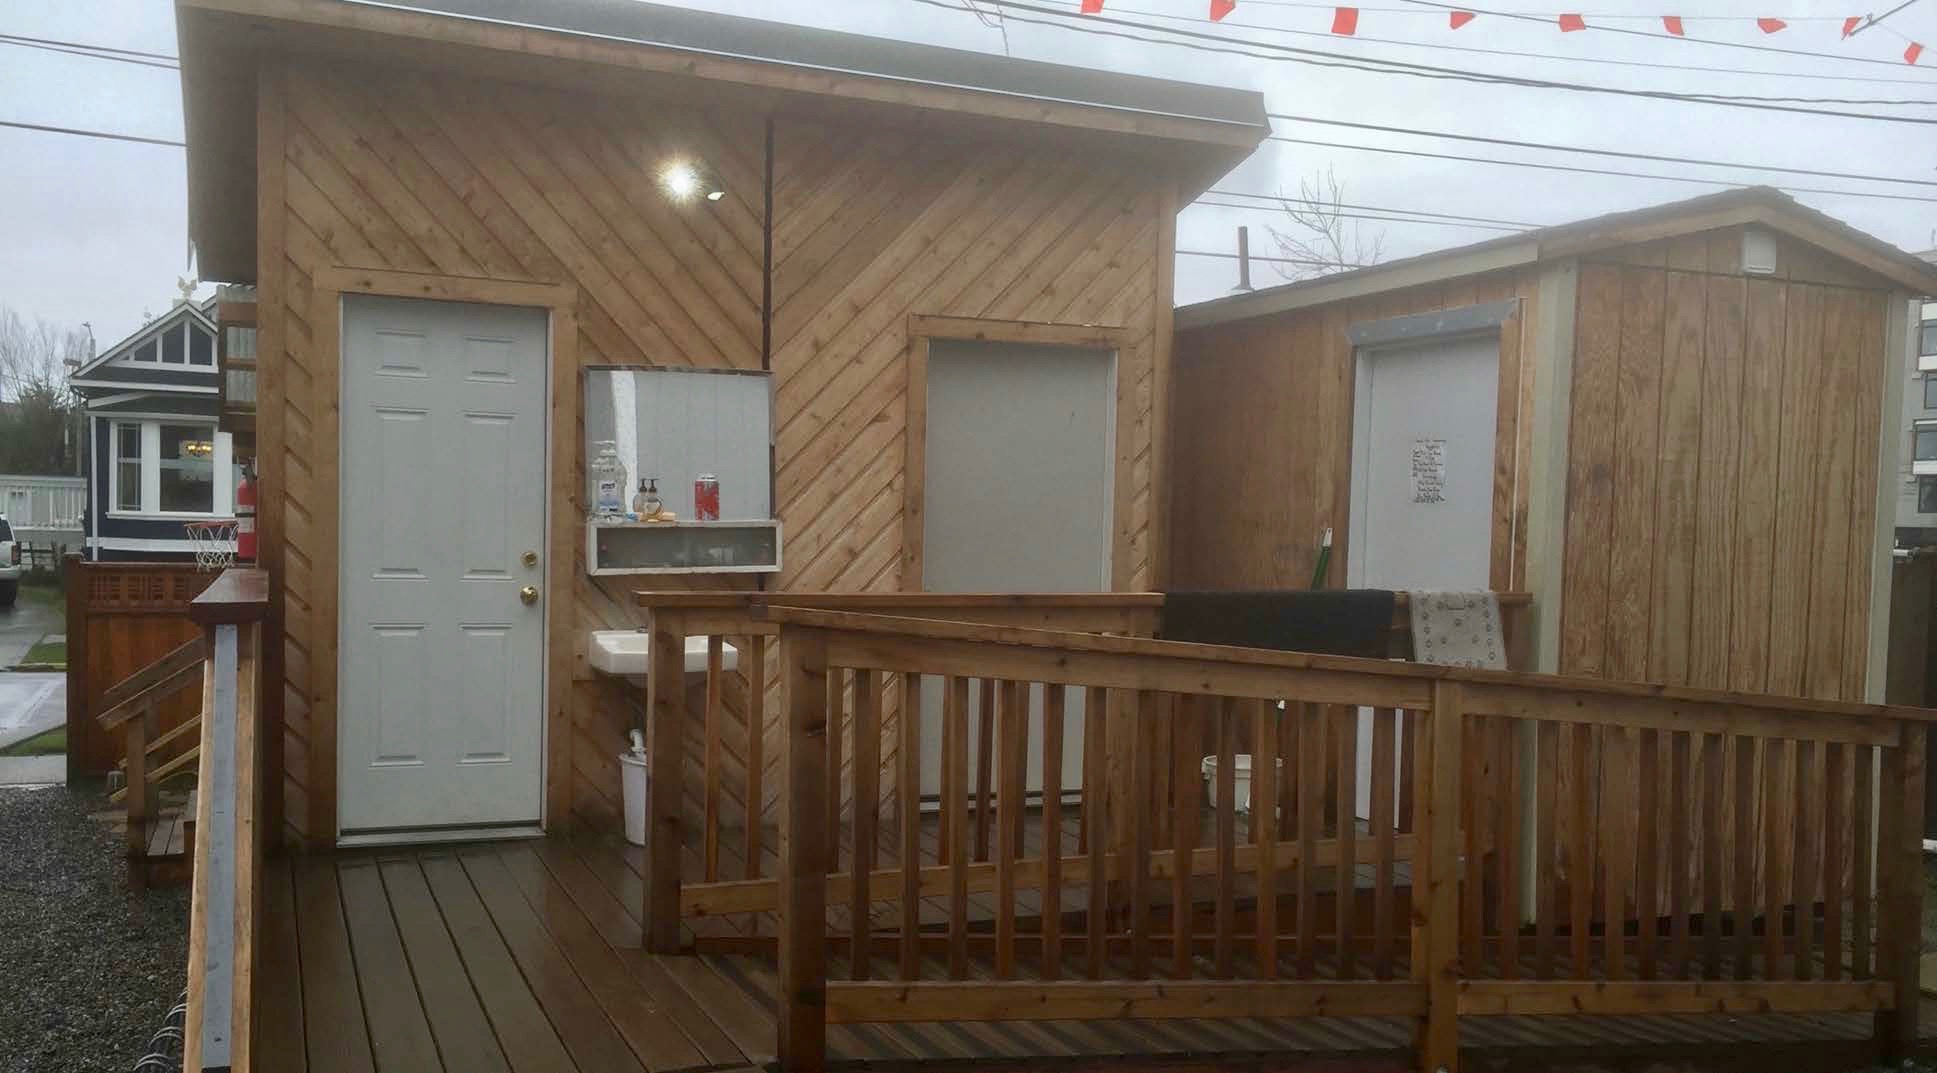 Suquamish Tribe looks to address homelessness on reservation with tiny houses